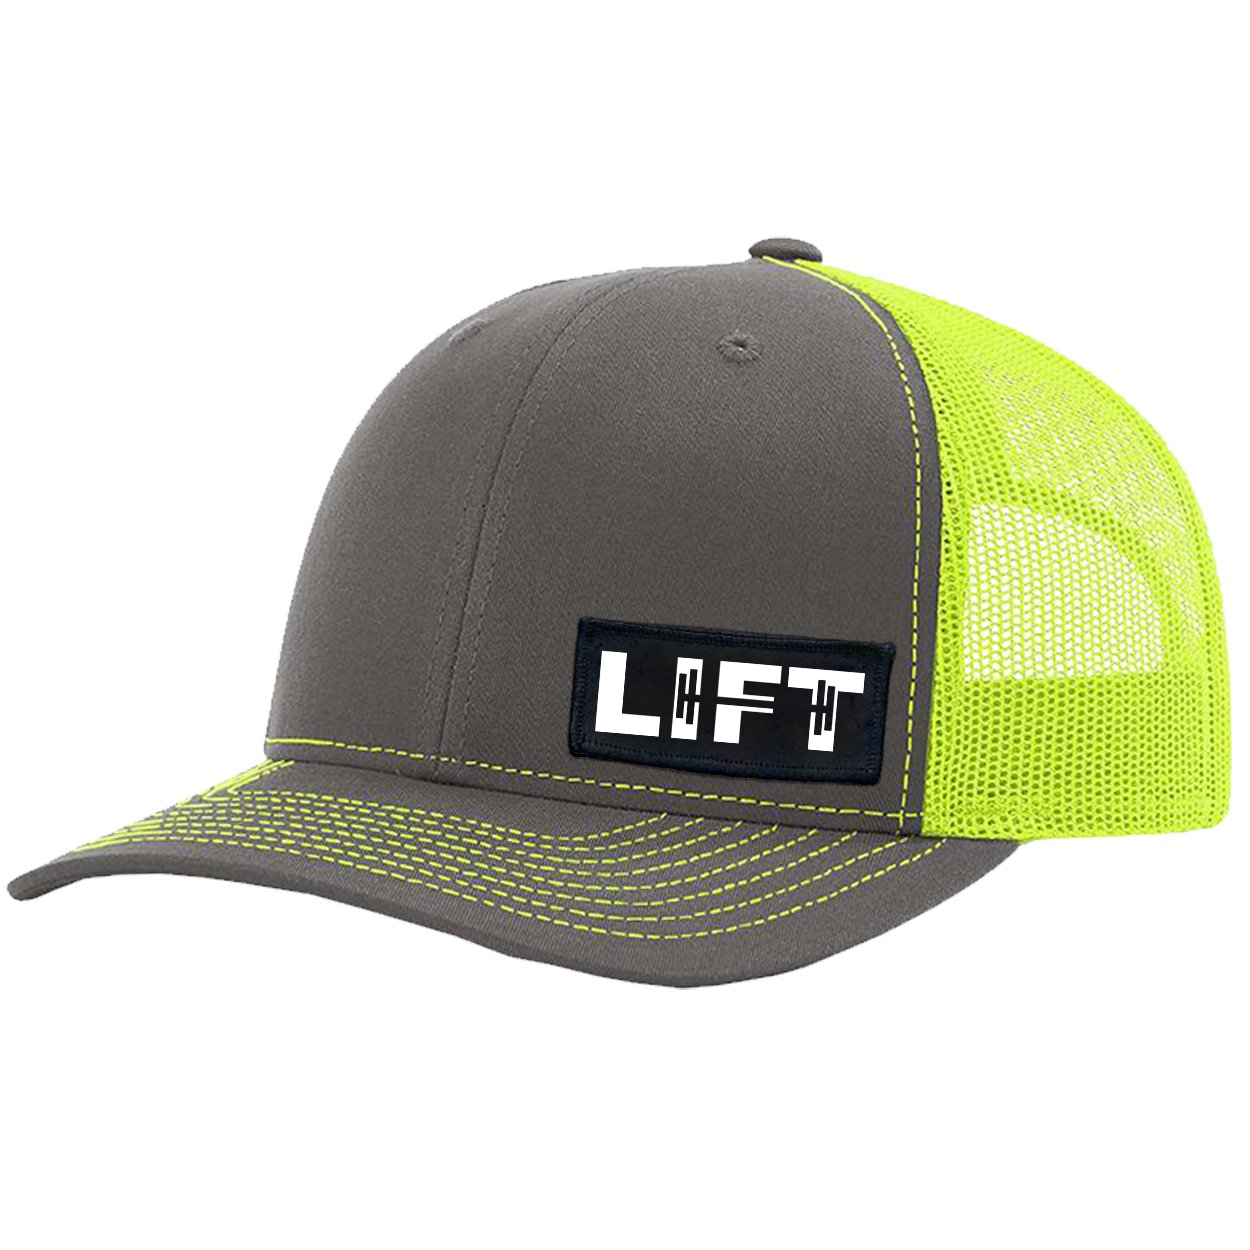 Lift Barbell Logo Night Out Woven Patch Snapback Trucker Hat Charcoal/Neon Yellow (White Logo)